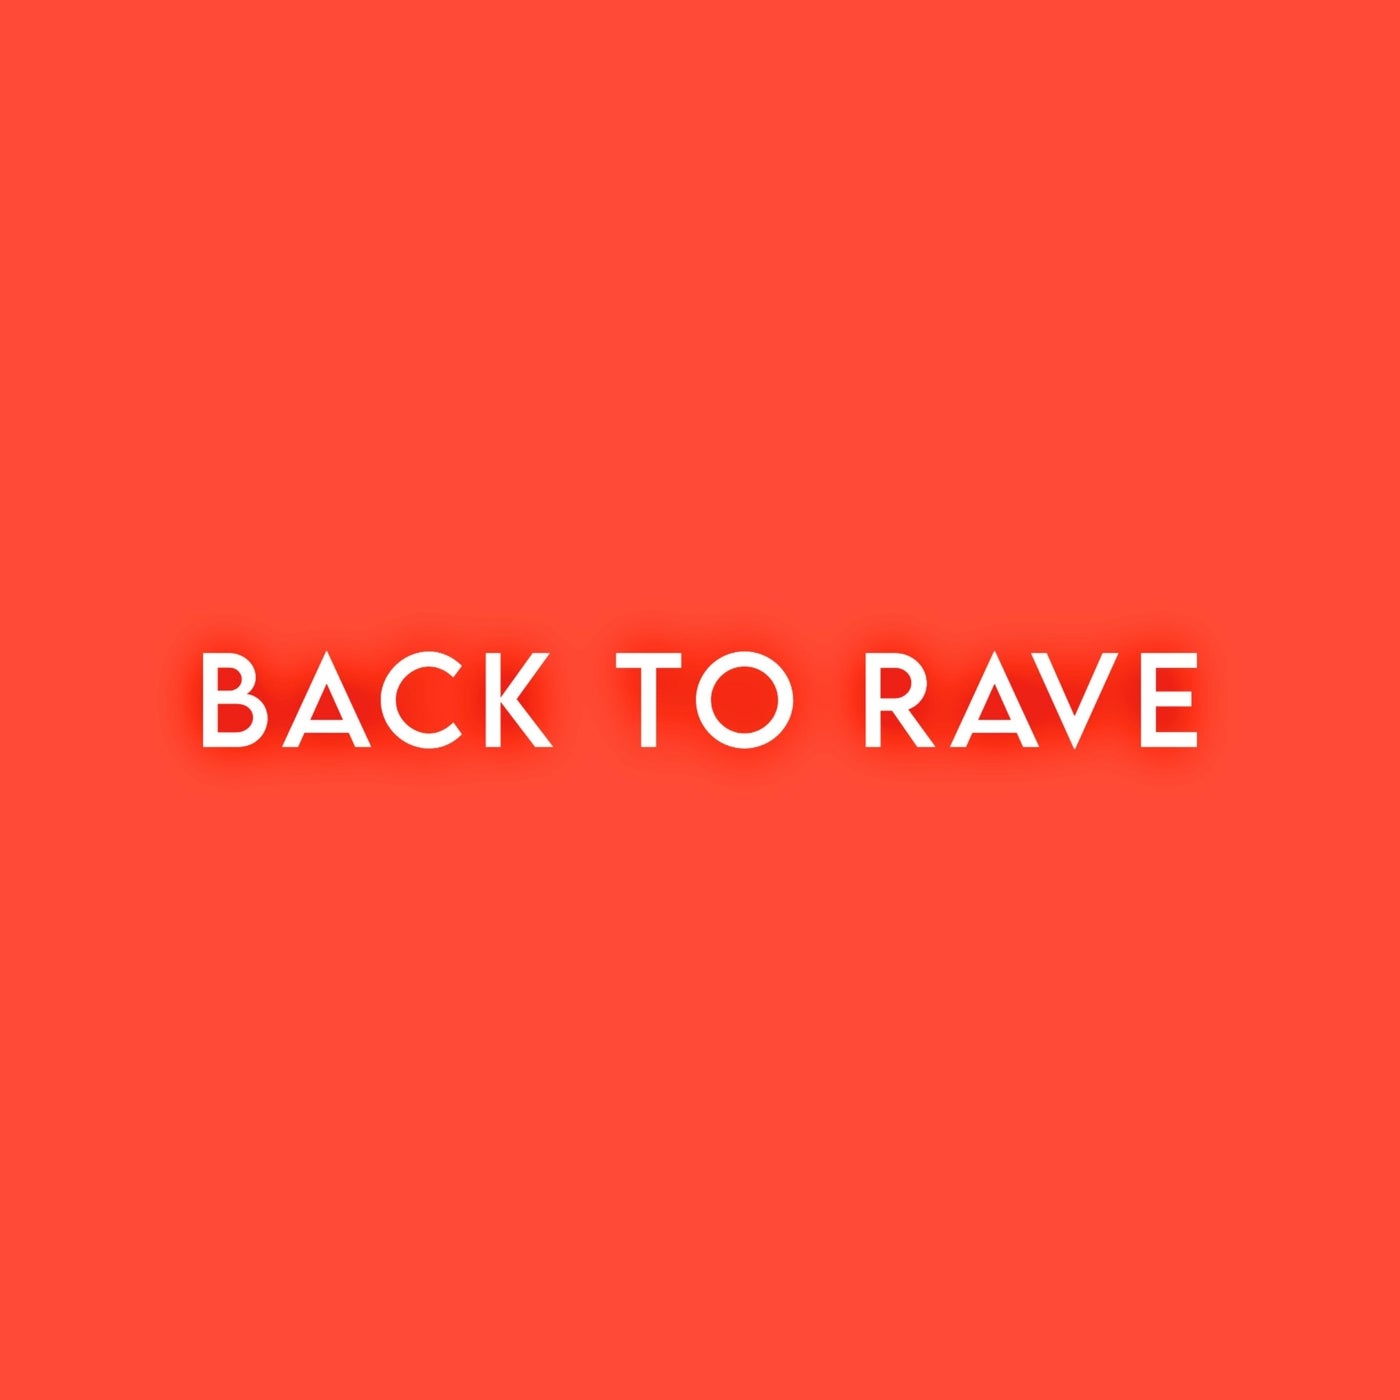 Back to Rave